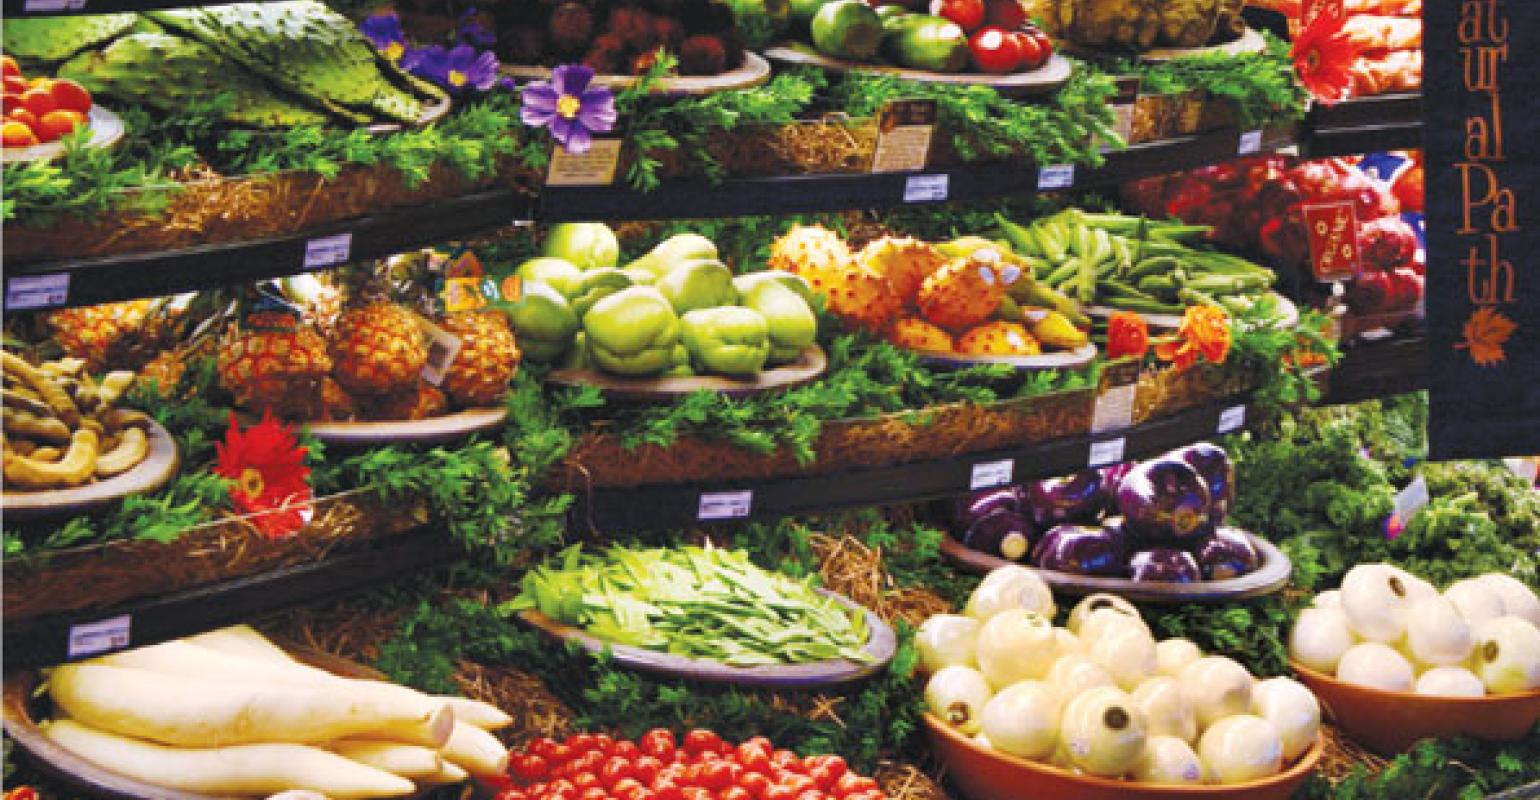 Produce Rules Dazzling Displays, Healthful Benefits Draw Shoppers